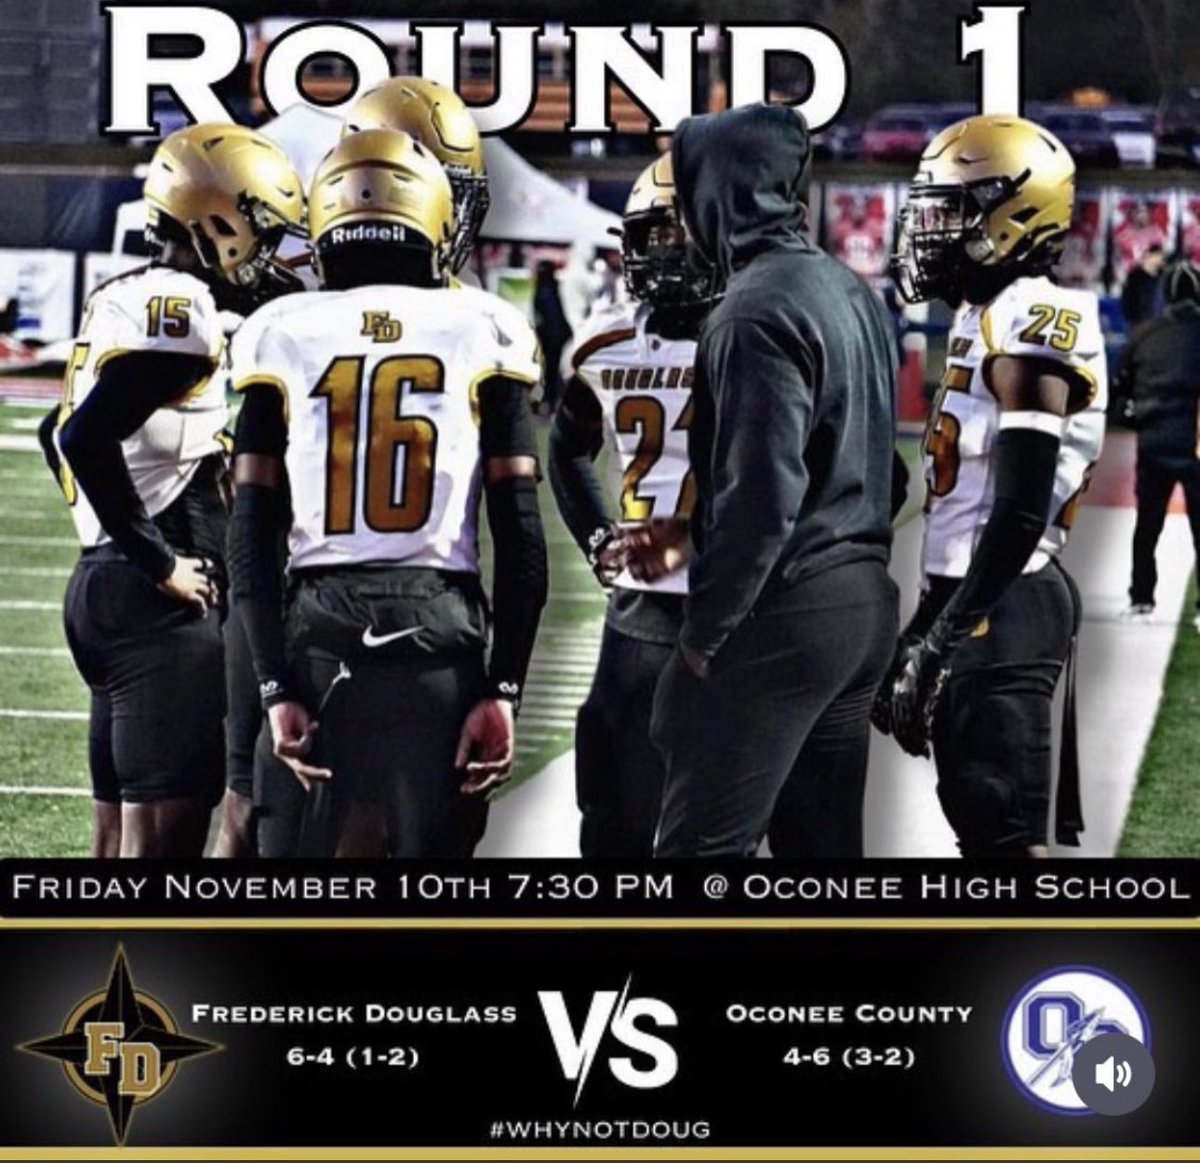 Round 1 of the playoffs begin this Friday, November 10th! Please support our team as they travel to Oconee County High School. Let’s go Astros! #webelieve #Astropride💛🖤💛🖤💛🖤